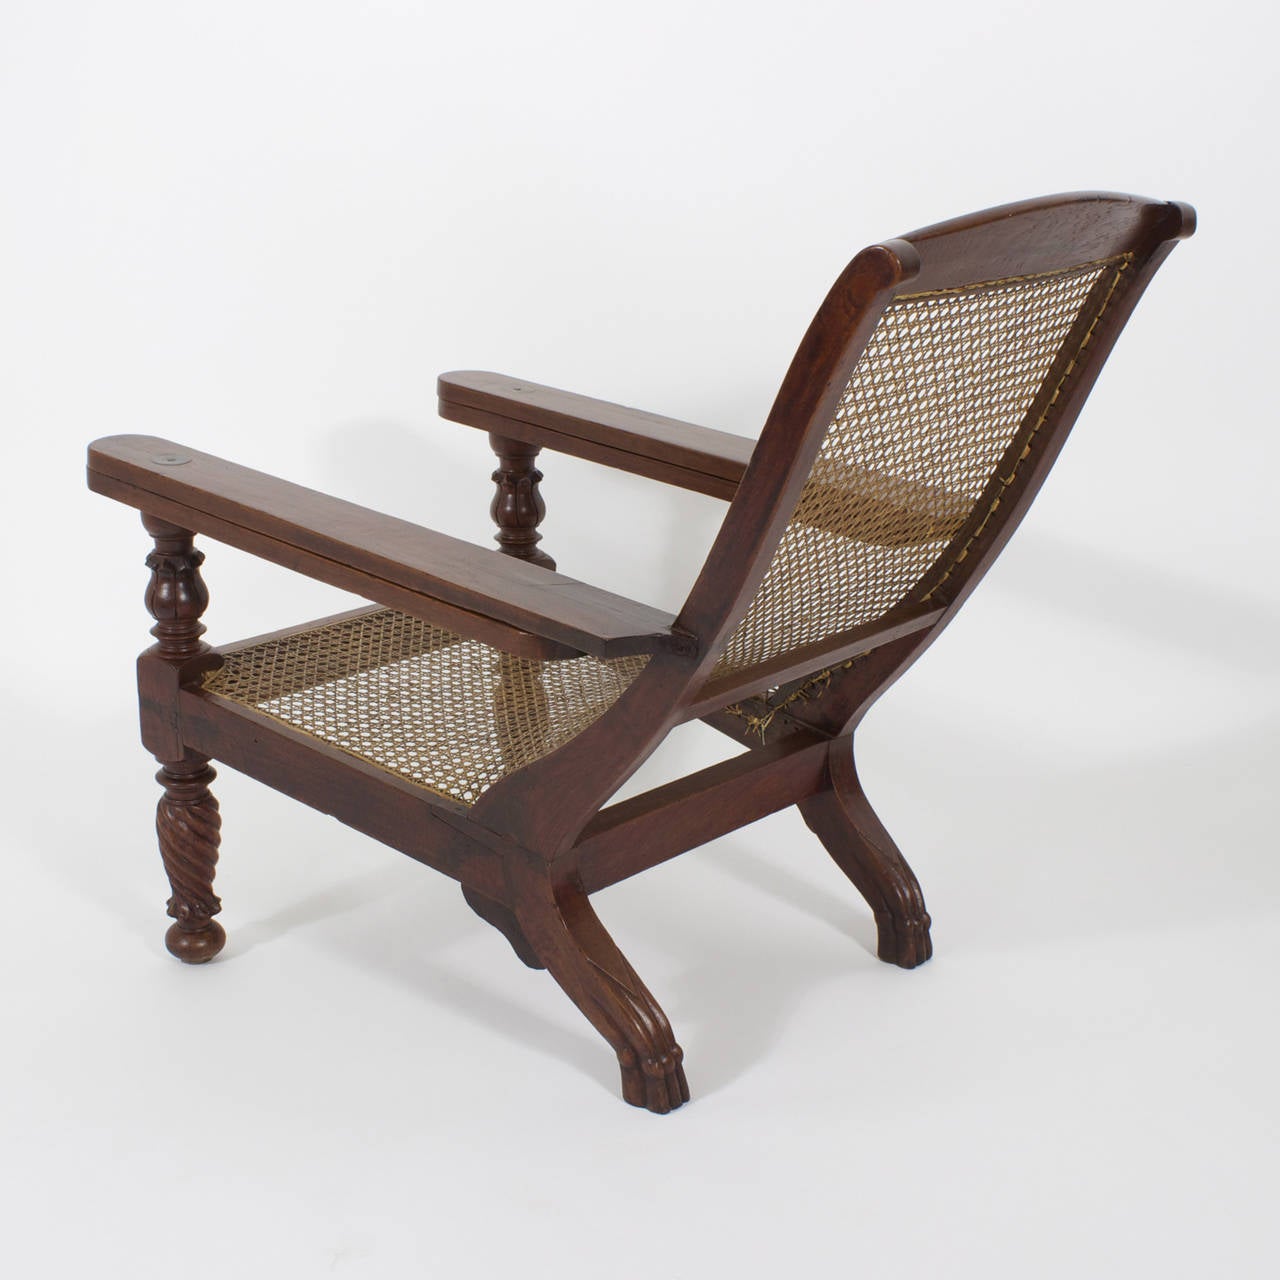 Inviting, classic Anglo Indian mahogany plantation or planters chair with turned and carved front legs, slightly paneled skirt, animal paw hind legs and swing out arms. Sit back and enjoy life. Newly polished. 60